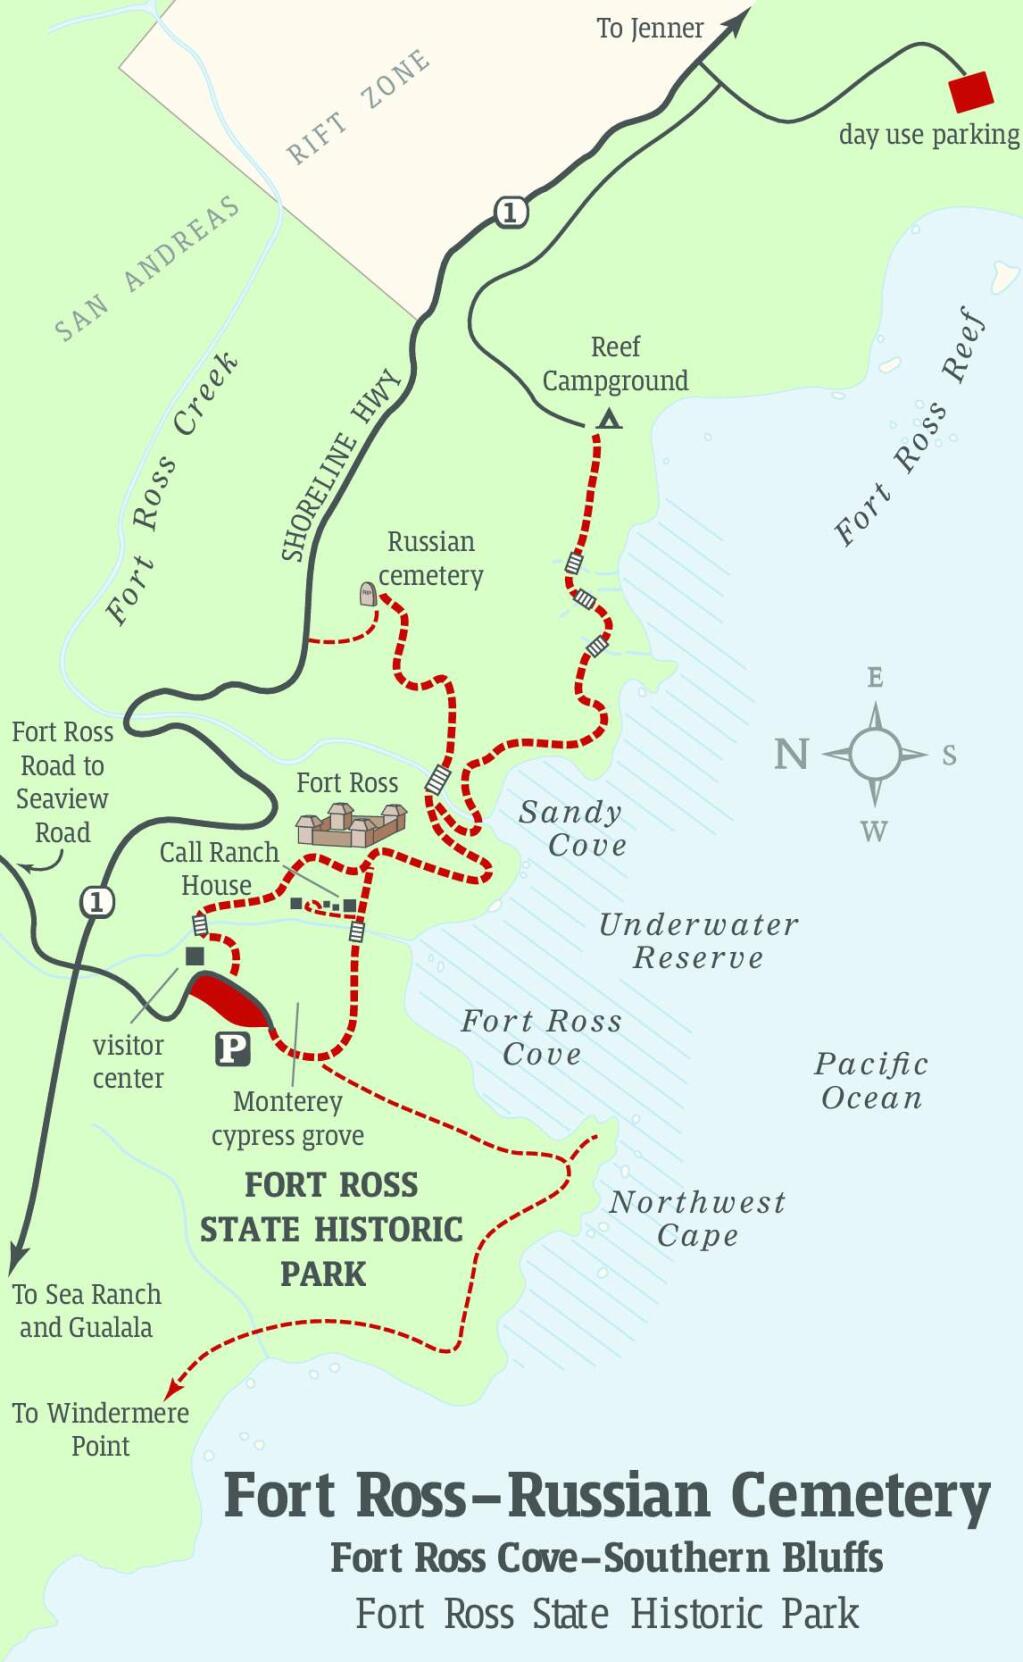 The easy 2.5-mile coastal bluff trail explores the historic Russian Fort Ross, the cemetery and the isolated cove where provisions were unloaded.(Richard Sheppard / Robert Stone)